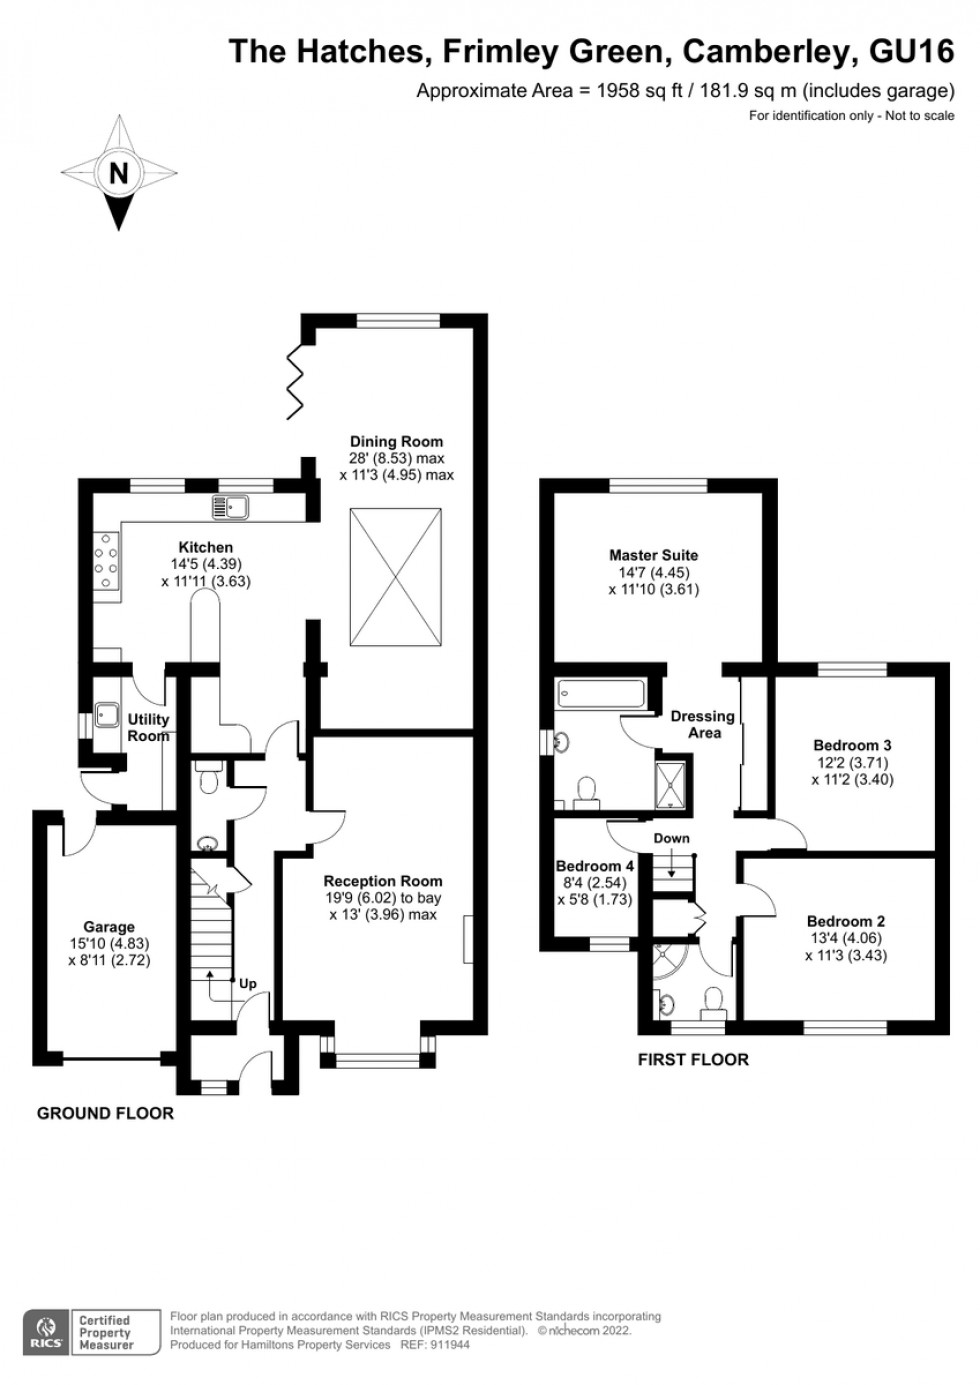 Floorplan for The Hatches, Frimley Green